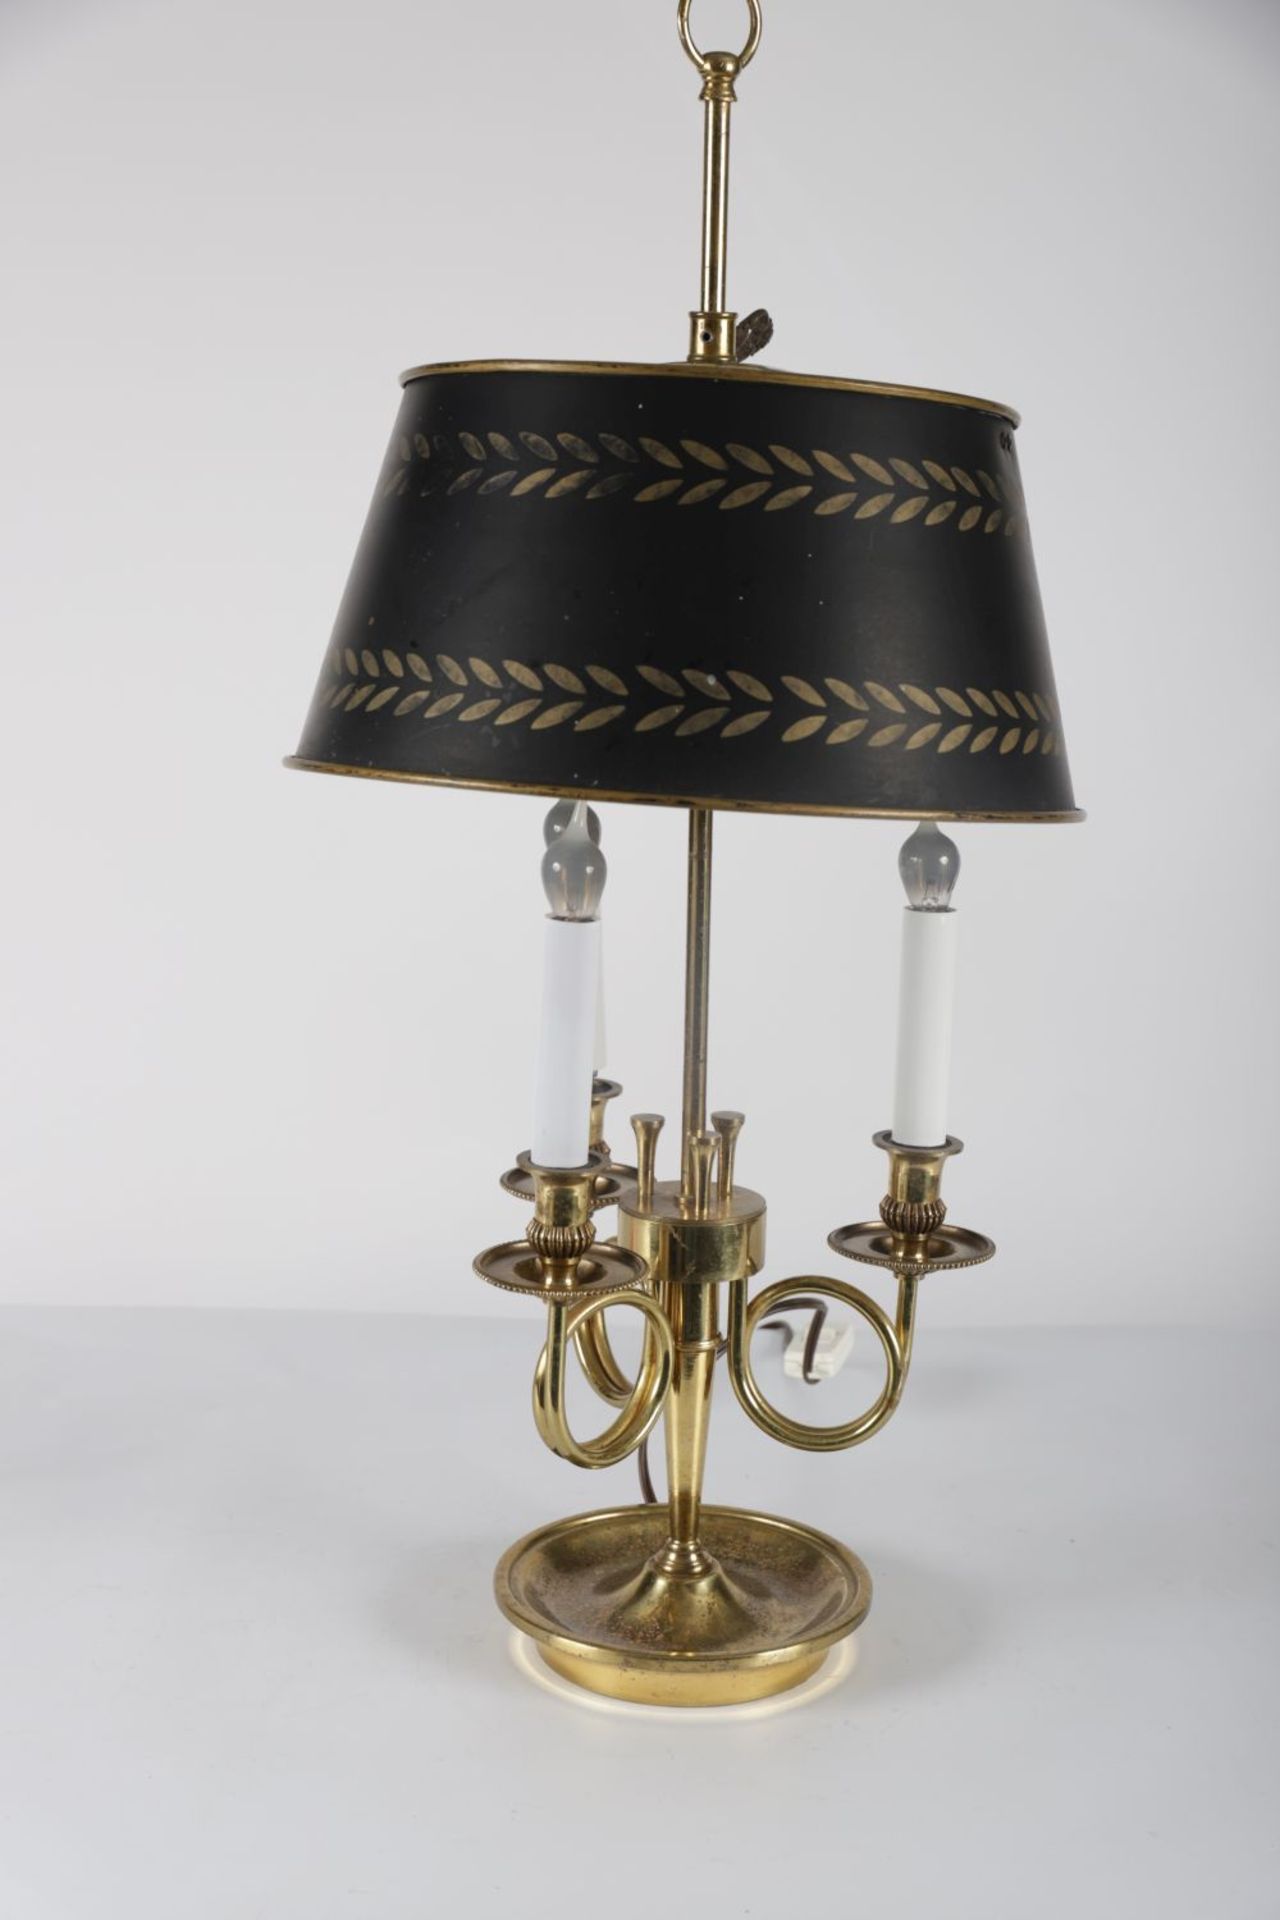 EDWARDIAN BRASS TABLE LAMP - Image 2 of 4